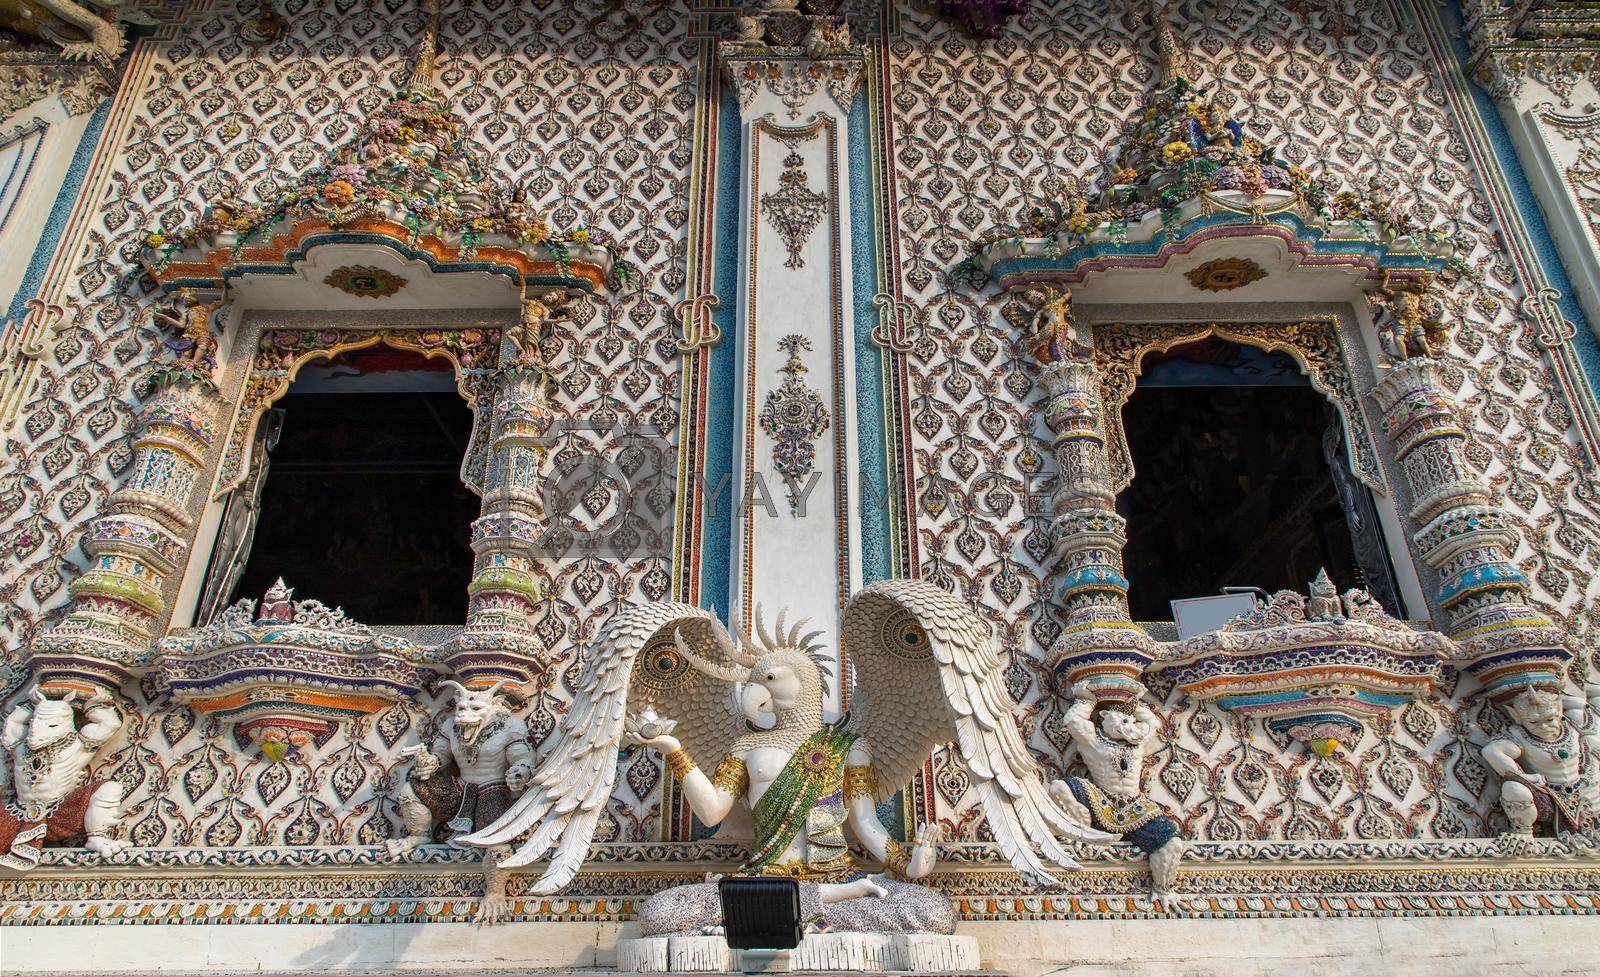 Bangkok, Thailand. Feb - 10, 2022 : Elaborate sculptures of monsters decorated and windows side exterior the chapel of The Pariwas Ratchasongkram temple. No focus, specifically.